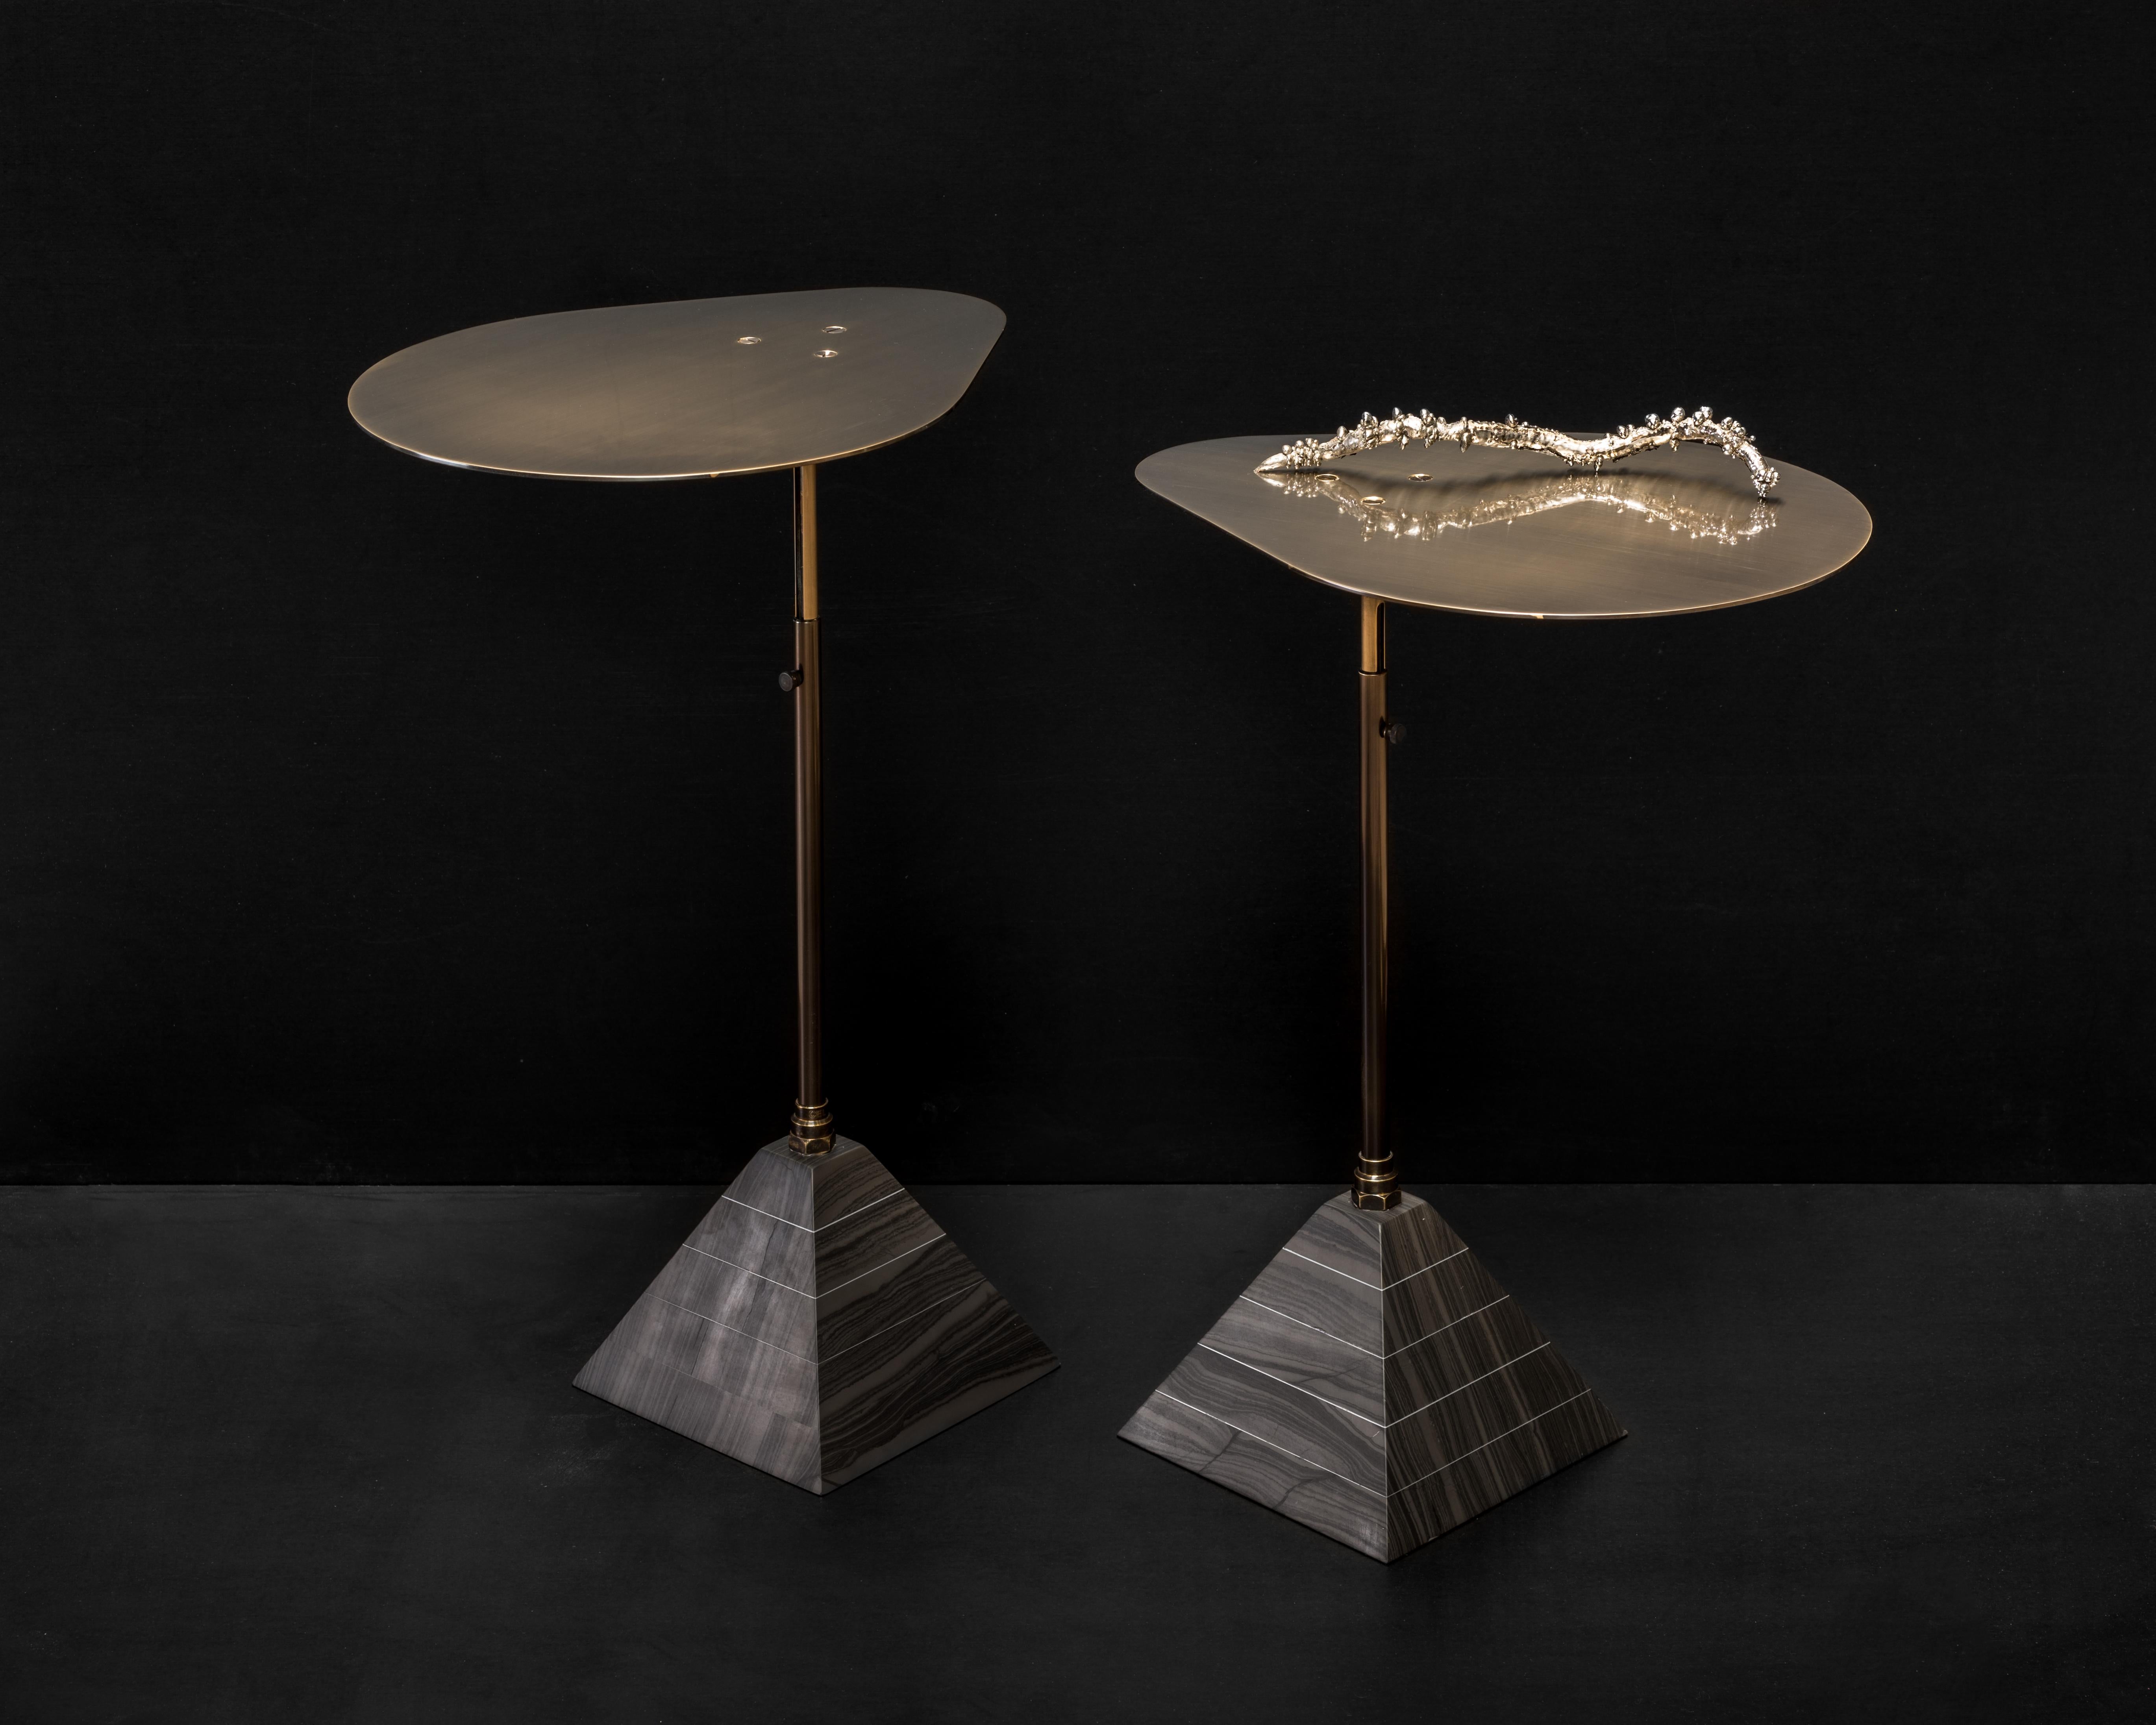 'Black Mirror' polished bronze cocktail table with Telescopic Post and black marble pyramid base. 
From Maison Gerard: 'Ben Erickson, an artist living and working in Brooklyn, New York, utilizes twentieth century design's most celebrated material